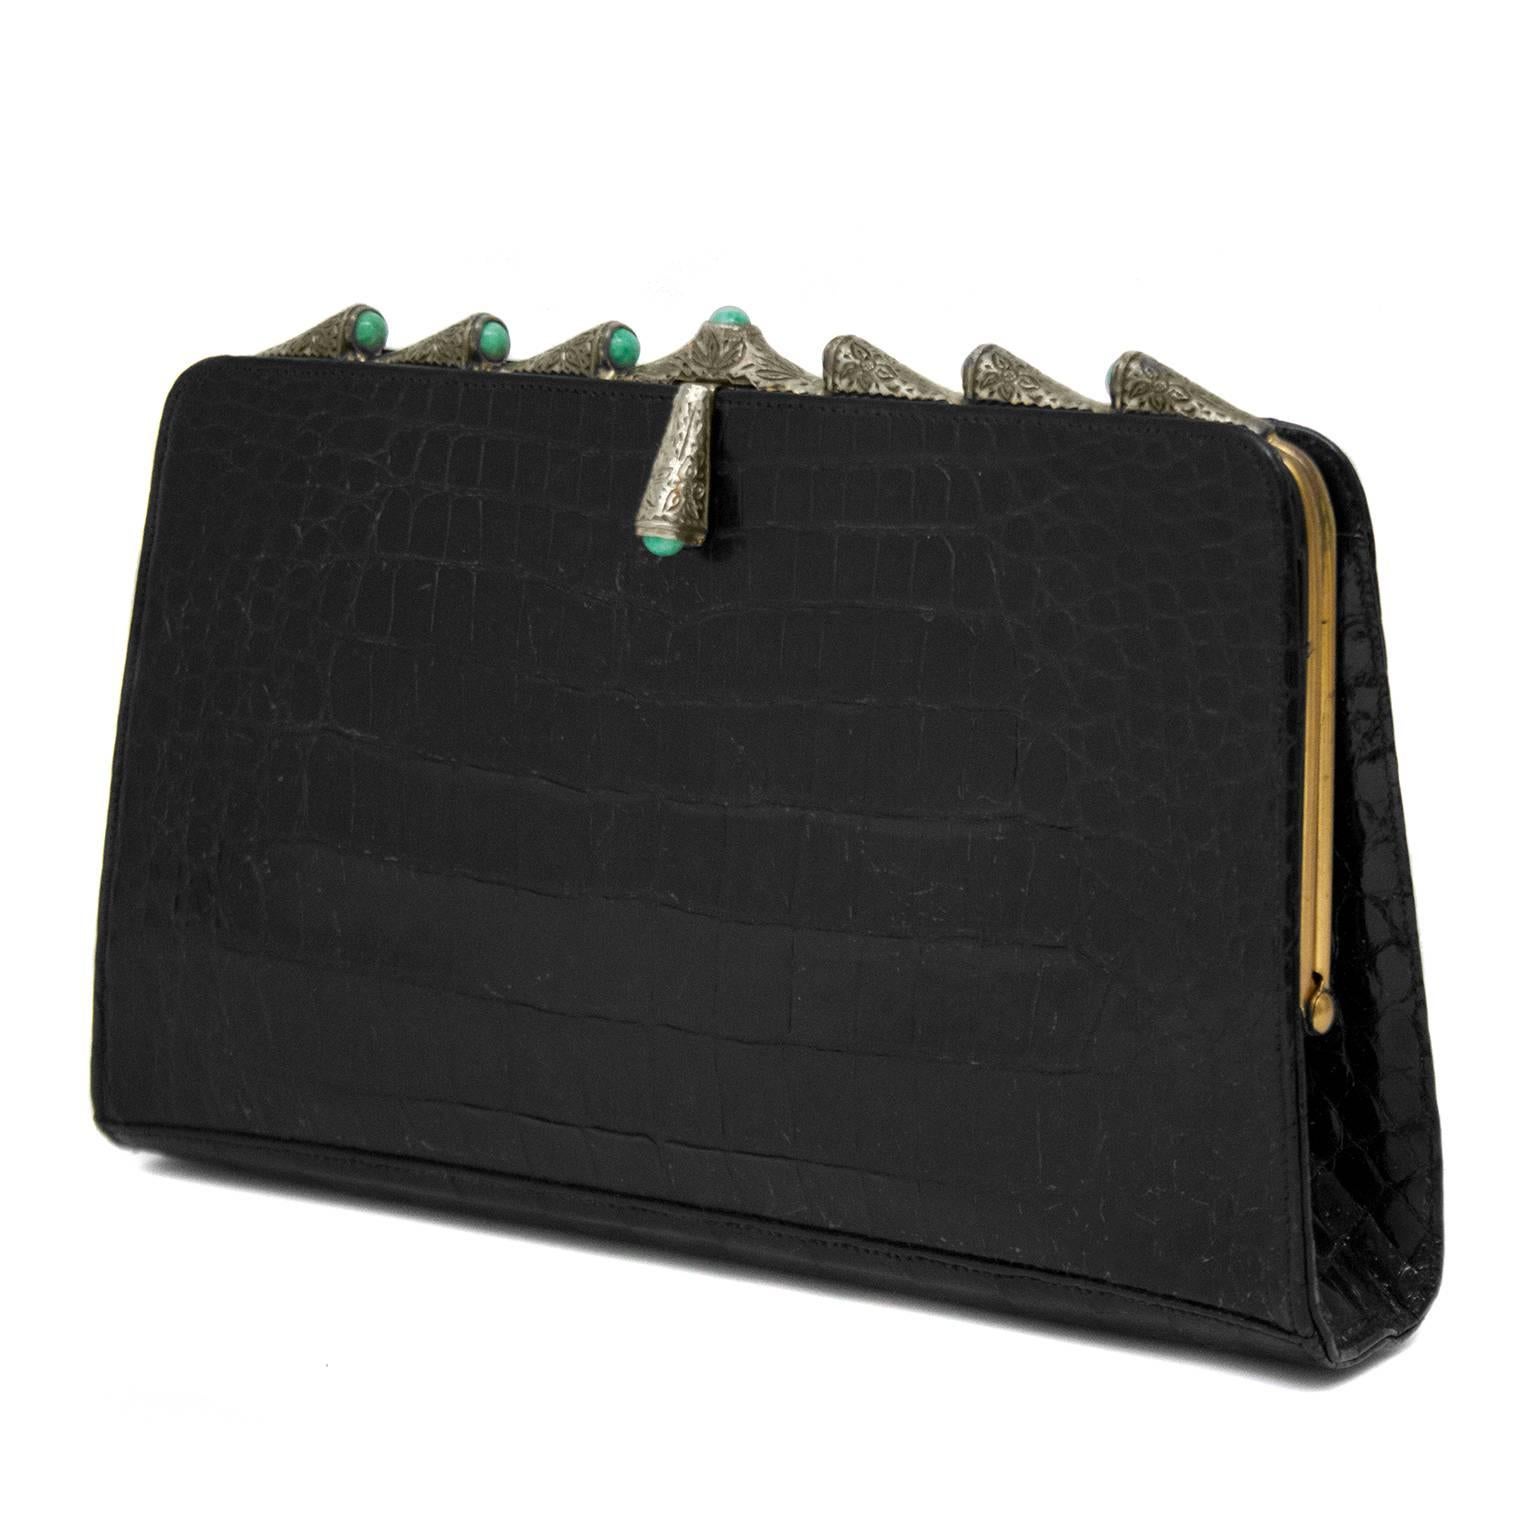 Elegant 1950s black crocodile skin evening clutch featuring etched silver details with turquoise stones. Gold hardware. Leather interior with one small slit pocket. Fits an iPhone. Small handle on back. 

Length 9.2" Height 6" Depth